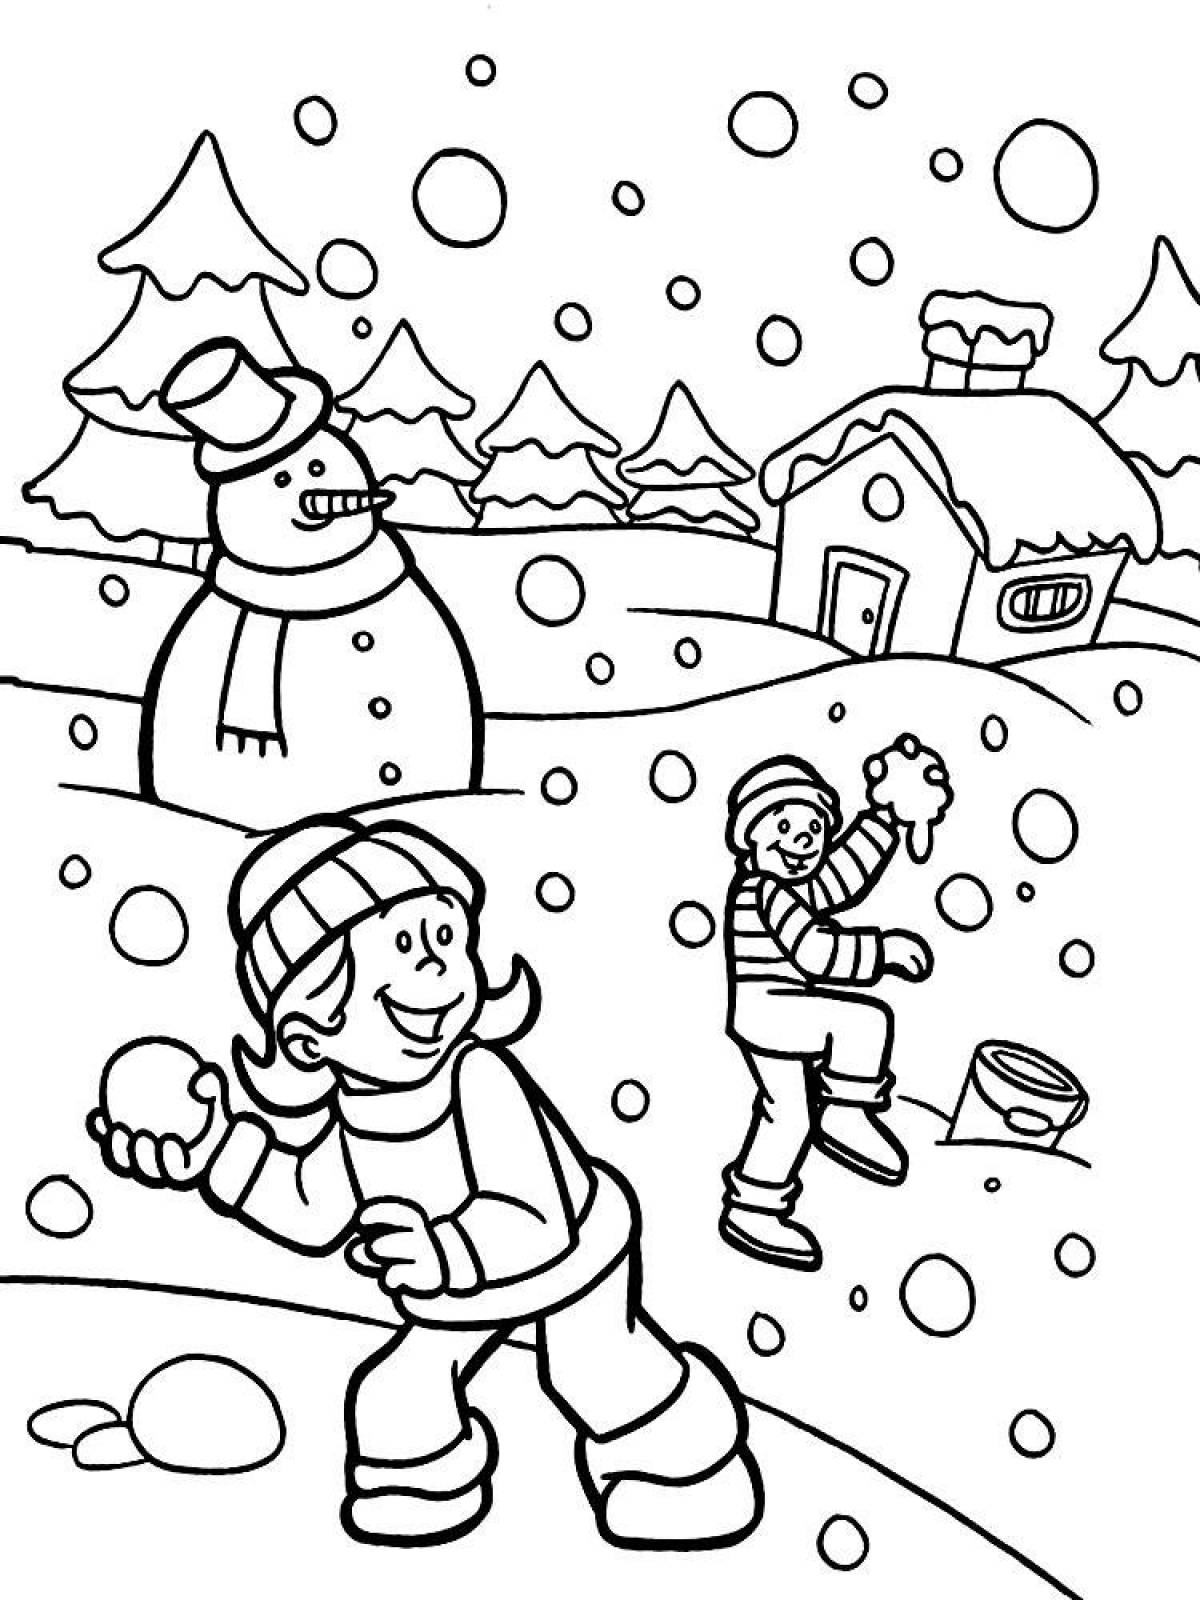 Wonderful winter coloring book for 3-4 year olds